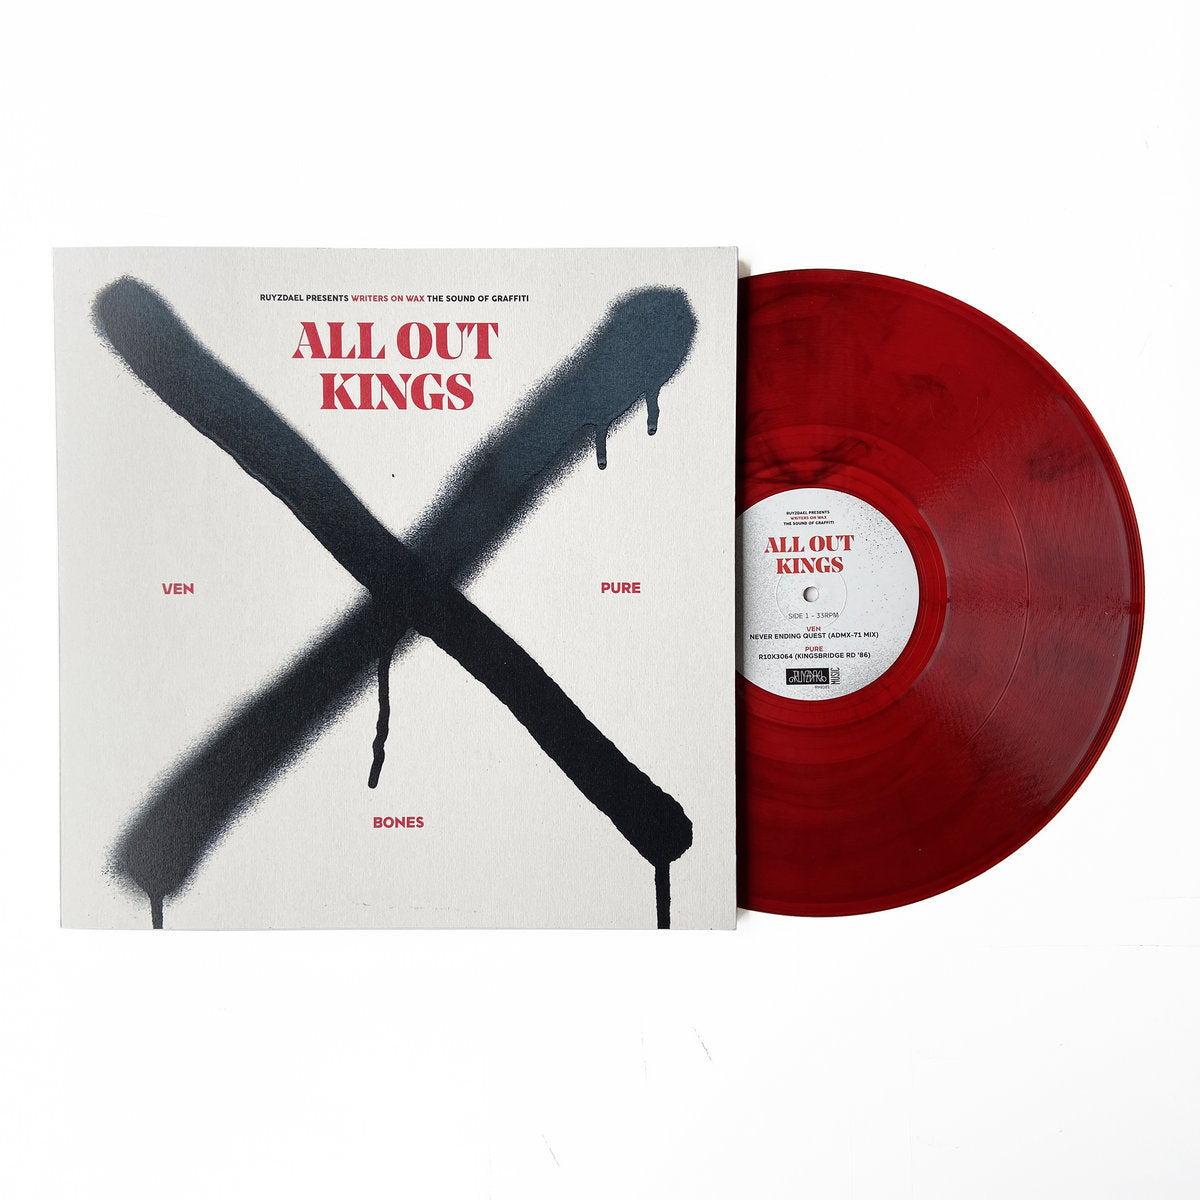 Writers on Wax x All Out Kings (VEN, PURE and Frankie Bones) EP Special